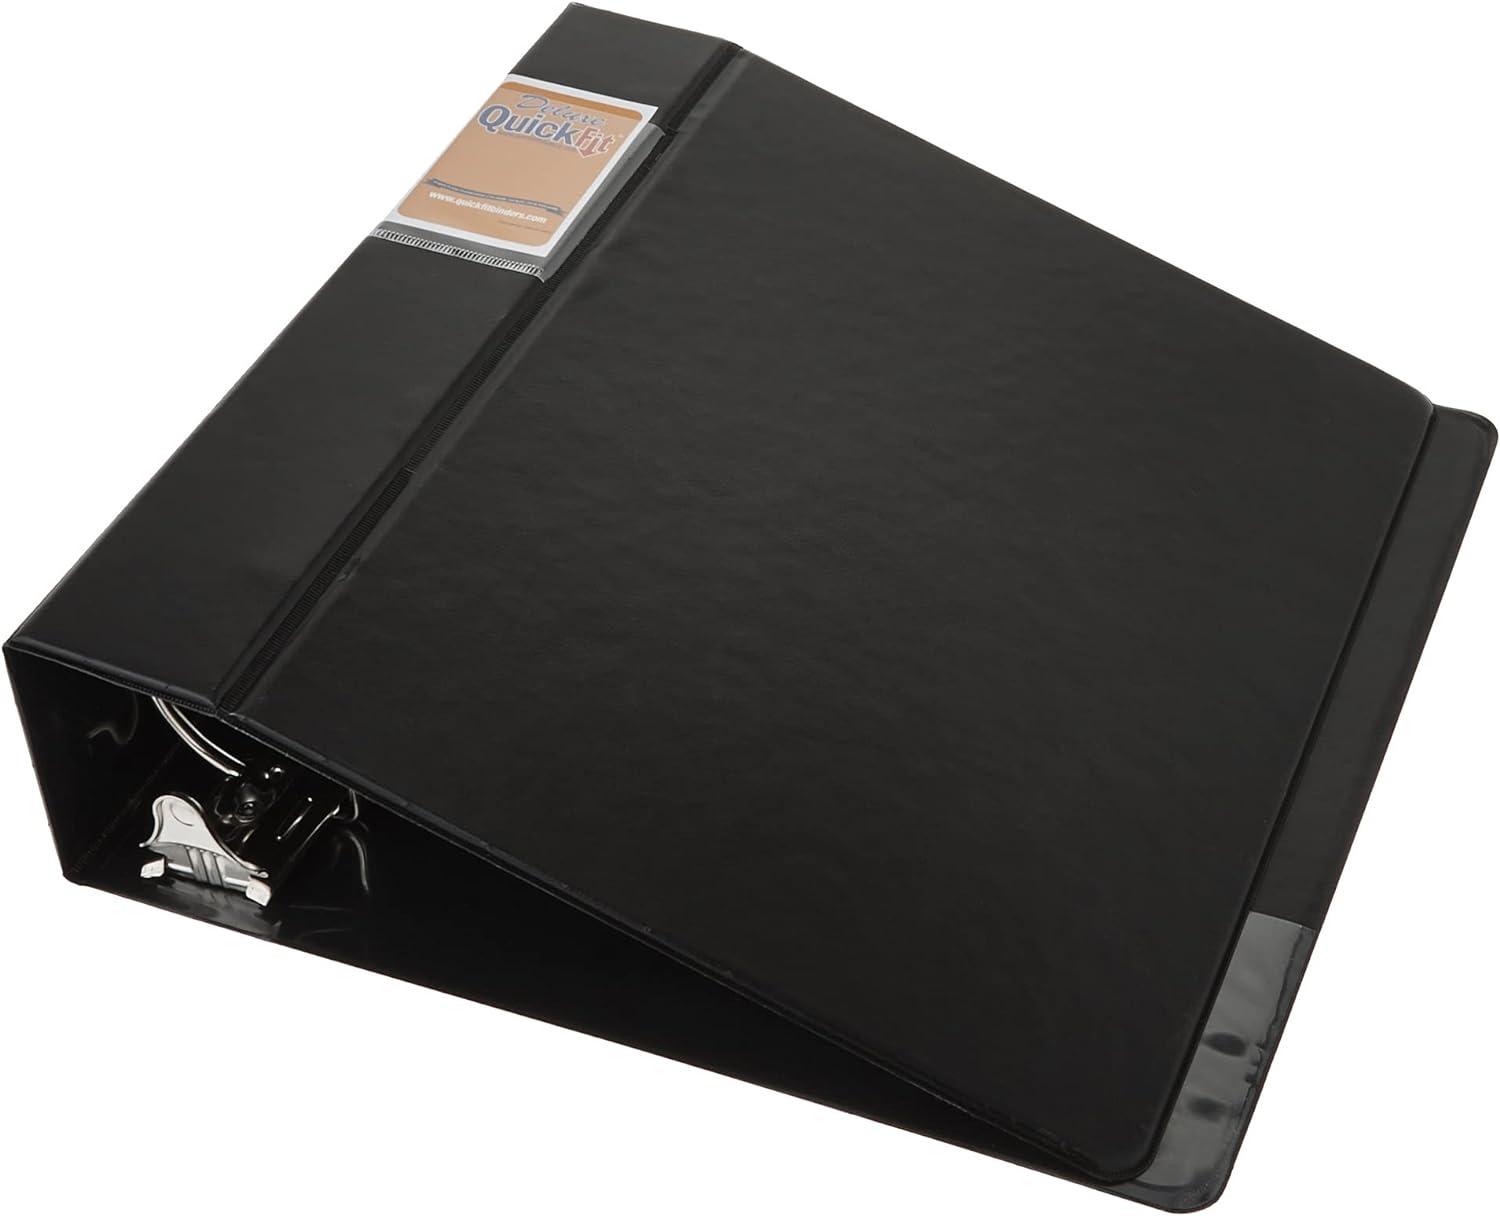 quickfit heavy-duty commercial binder 3-ring d-ring binder black 3 inch  quickfit b008yx7ecw